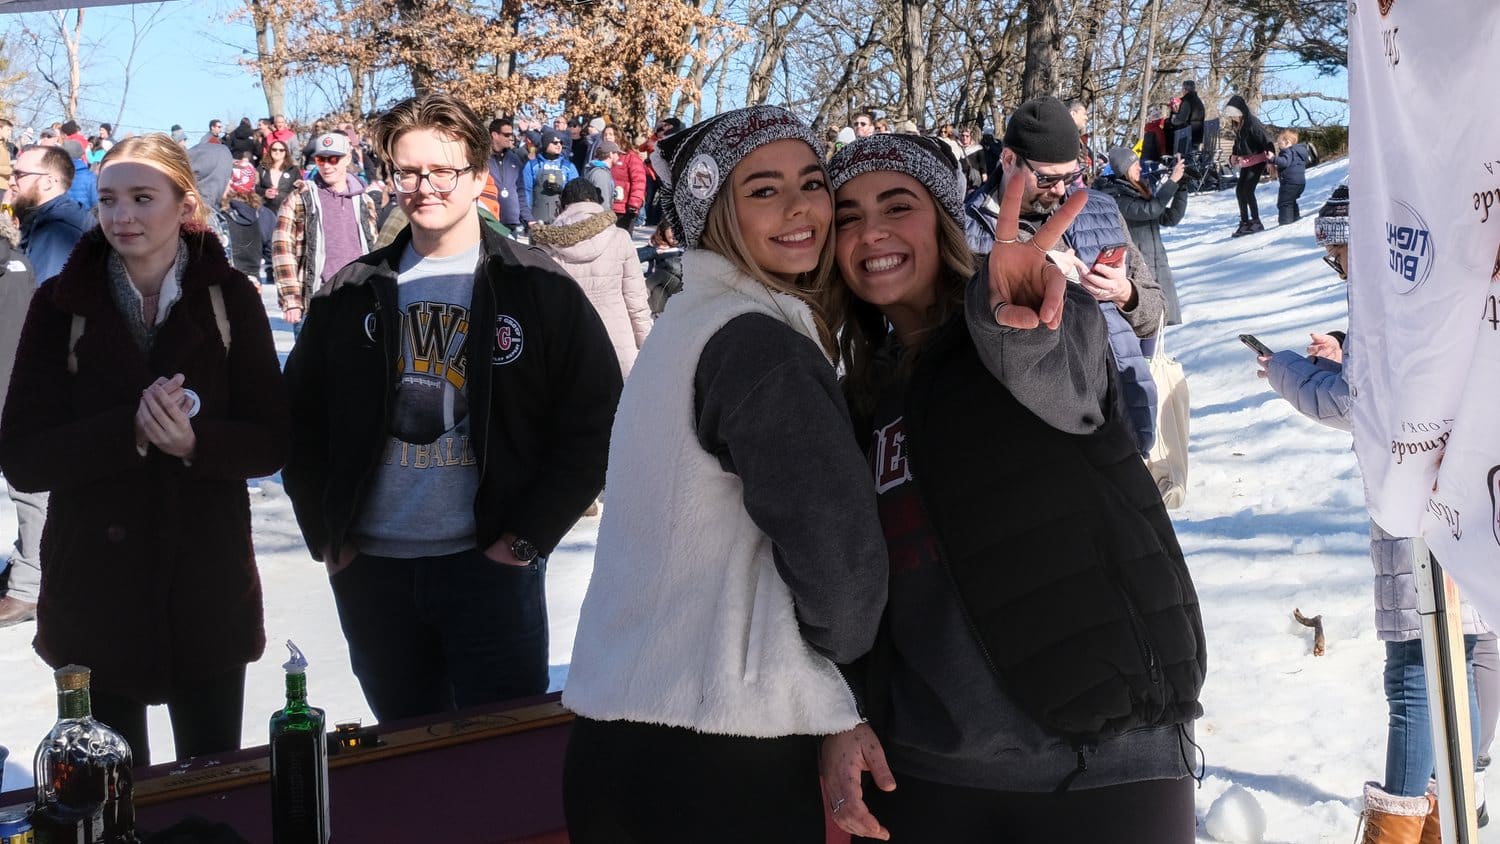 Sideouts bartenders at the 118th annual Norge Ski Club, winter tournament, 2023.